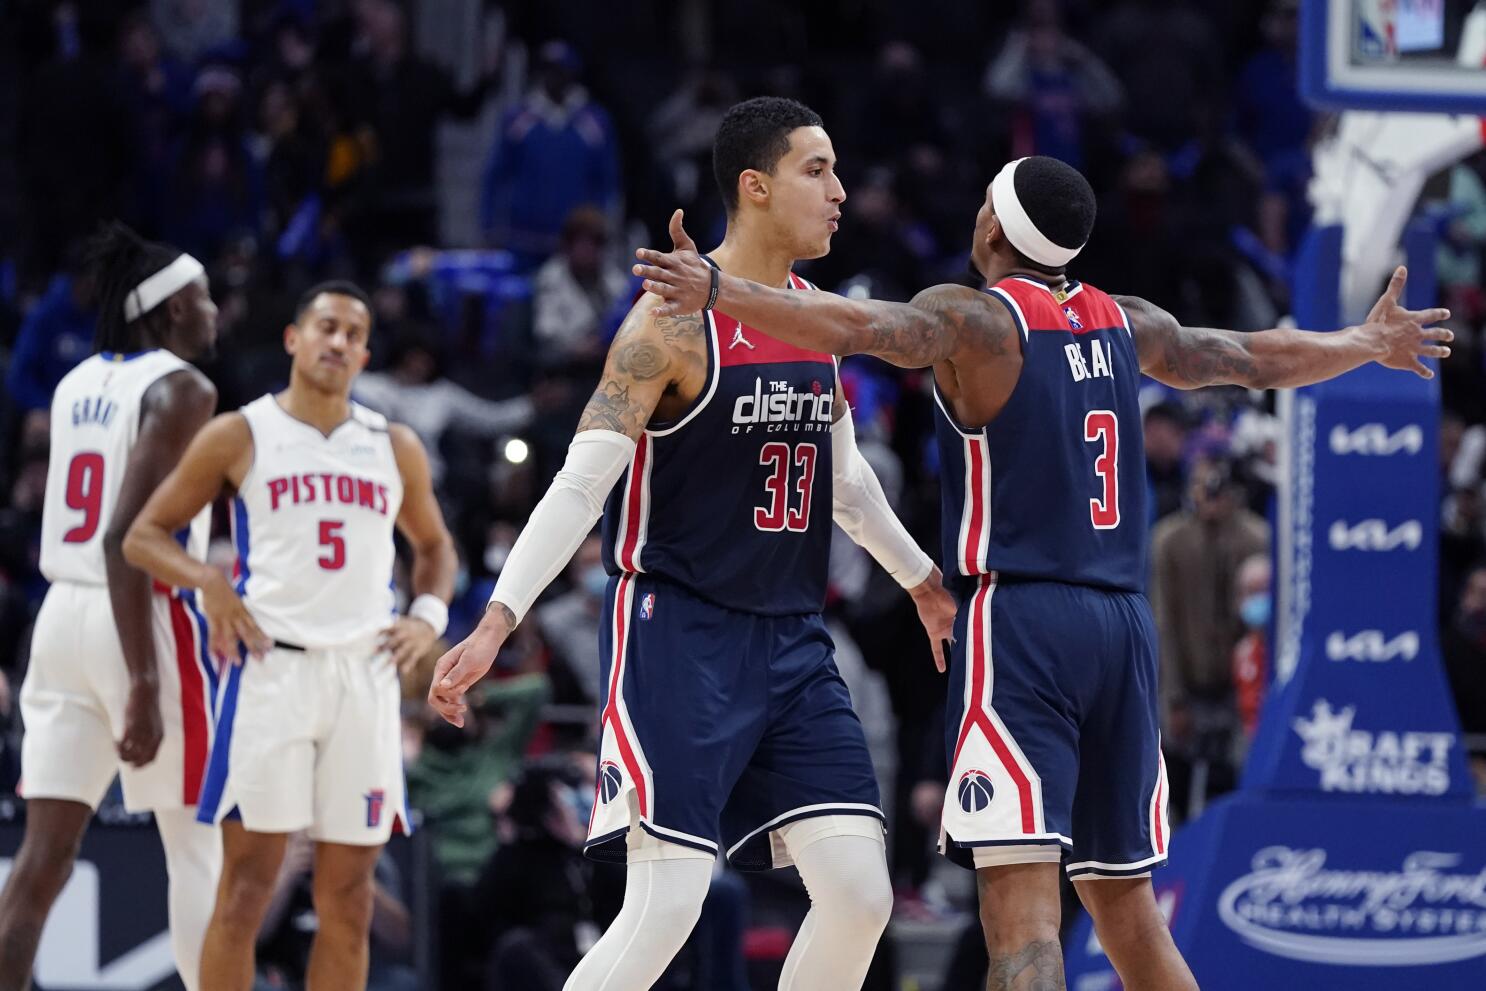 Kelly Oubre Jr. hits 8 fourth quarter three-pointers as Pistons